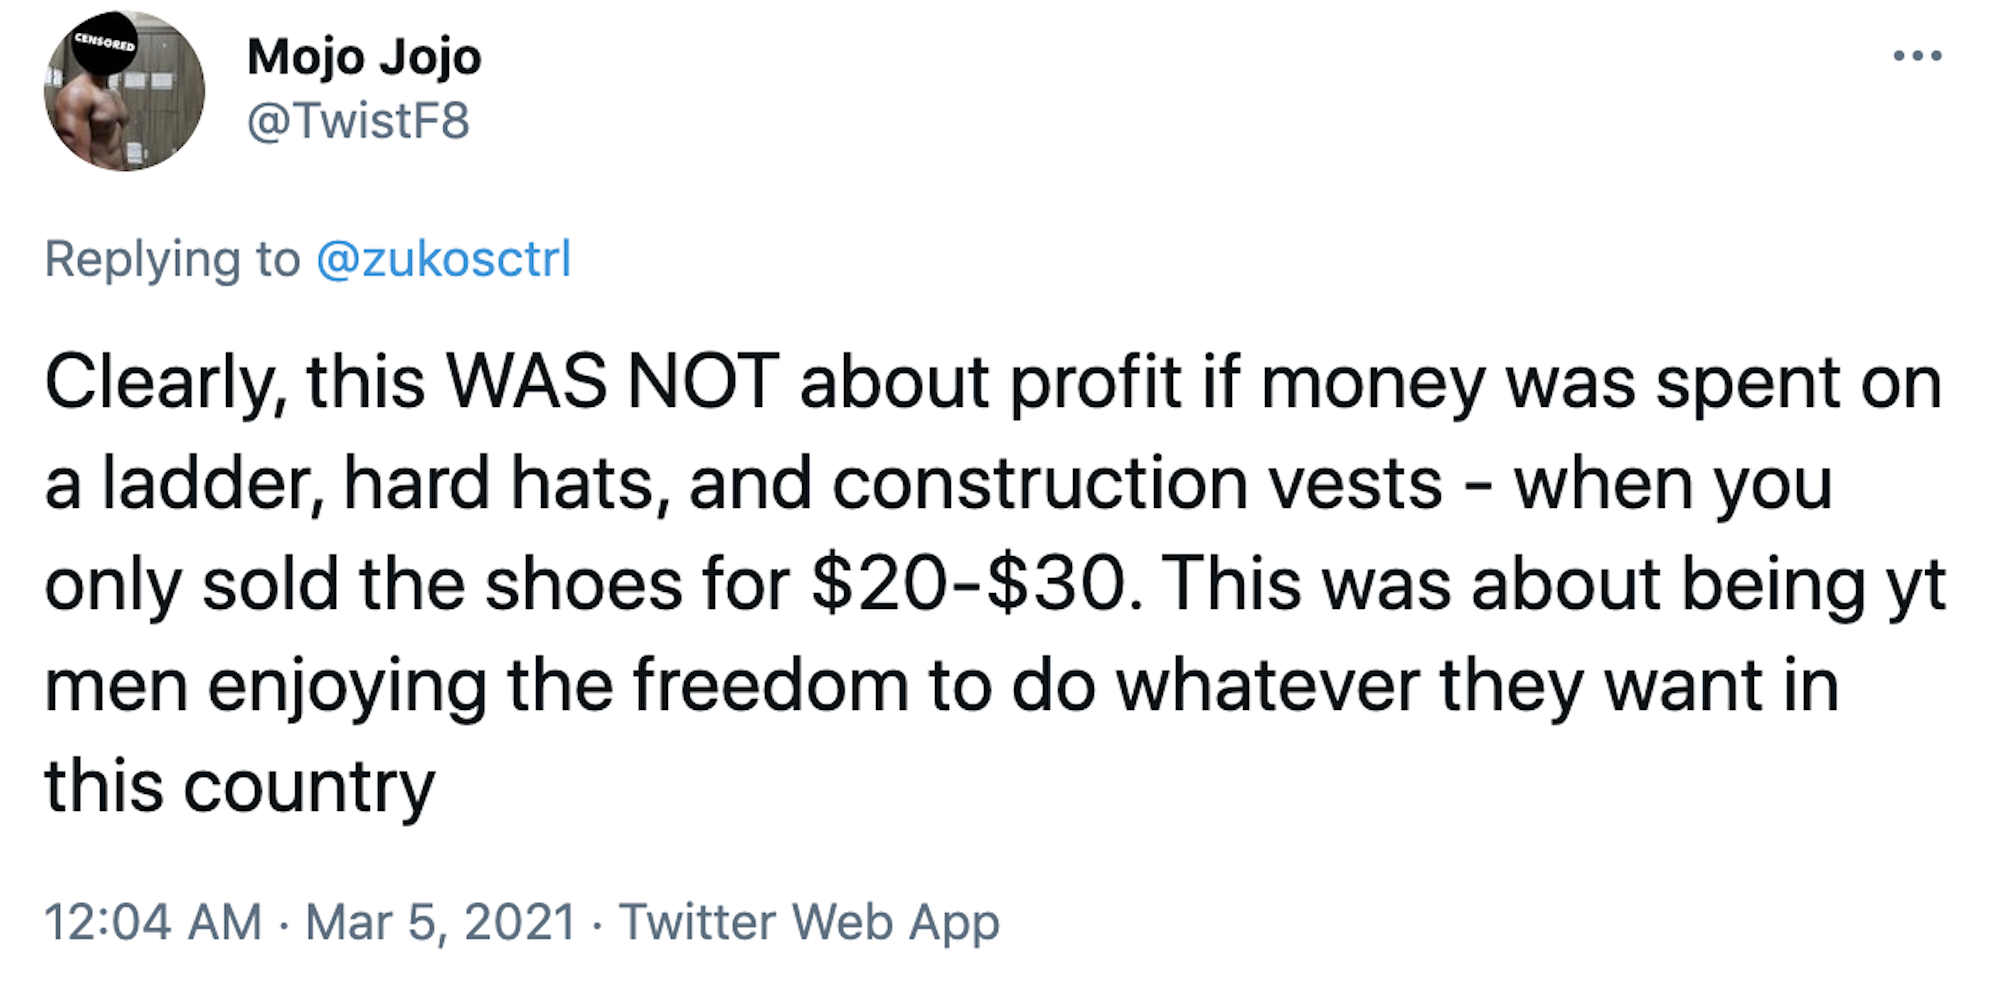 Clearly, this WAS NOT about profit if money was spent on a ladder, hard hats, and construction vests - when you only sold the shoes for $20-$30. This was about being yt men enjoying the freedom to do whatever they want in this country